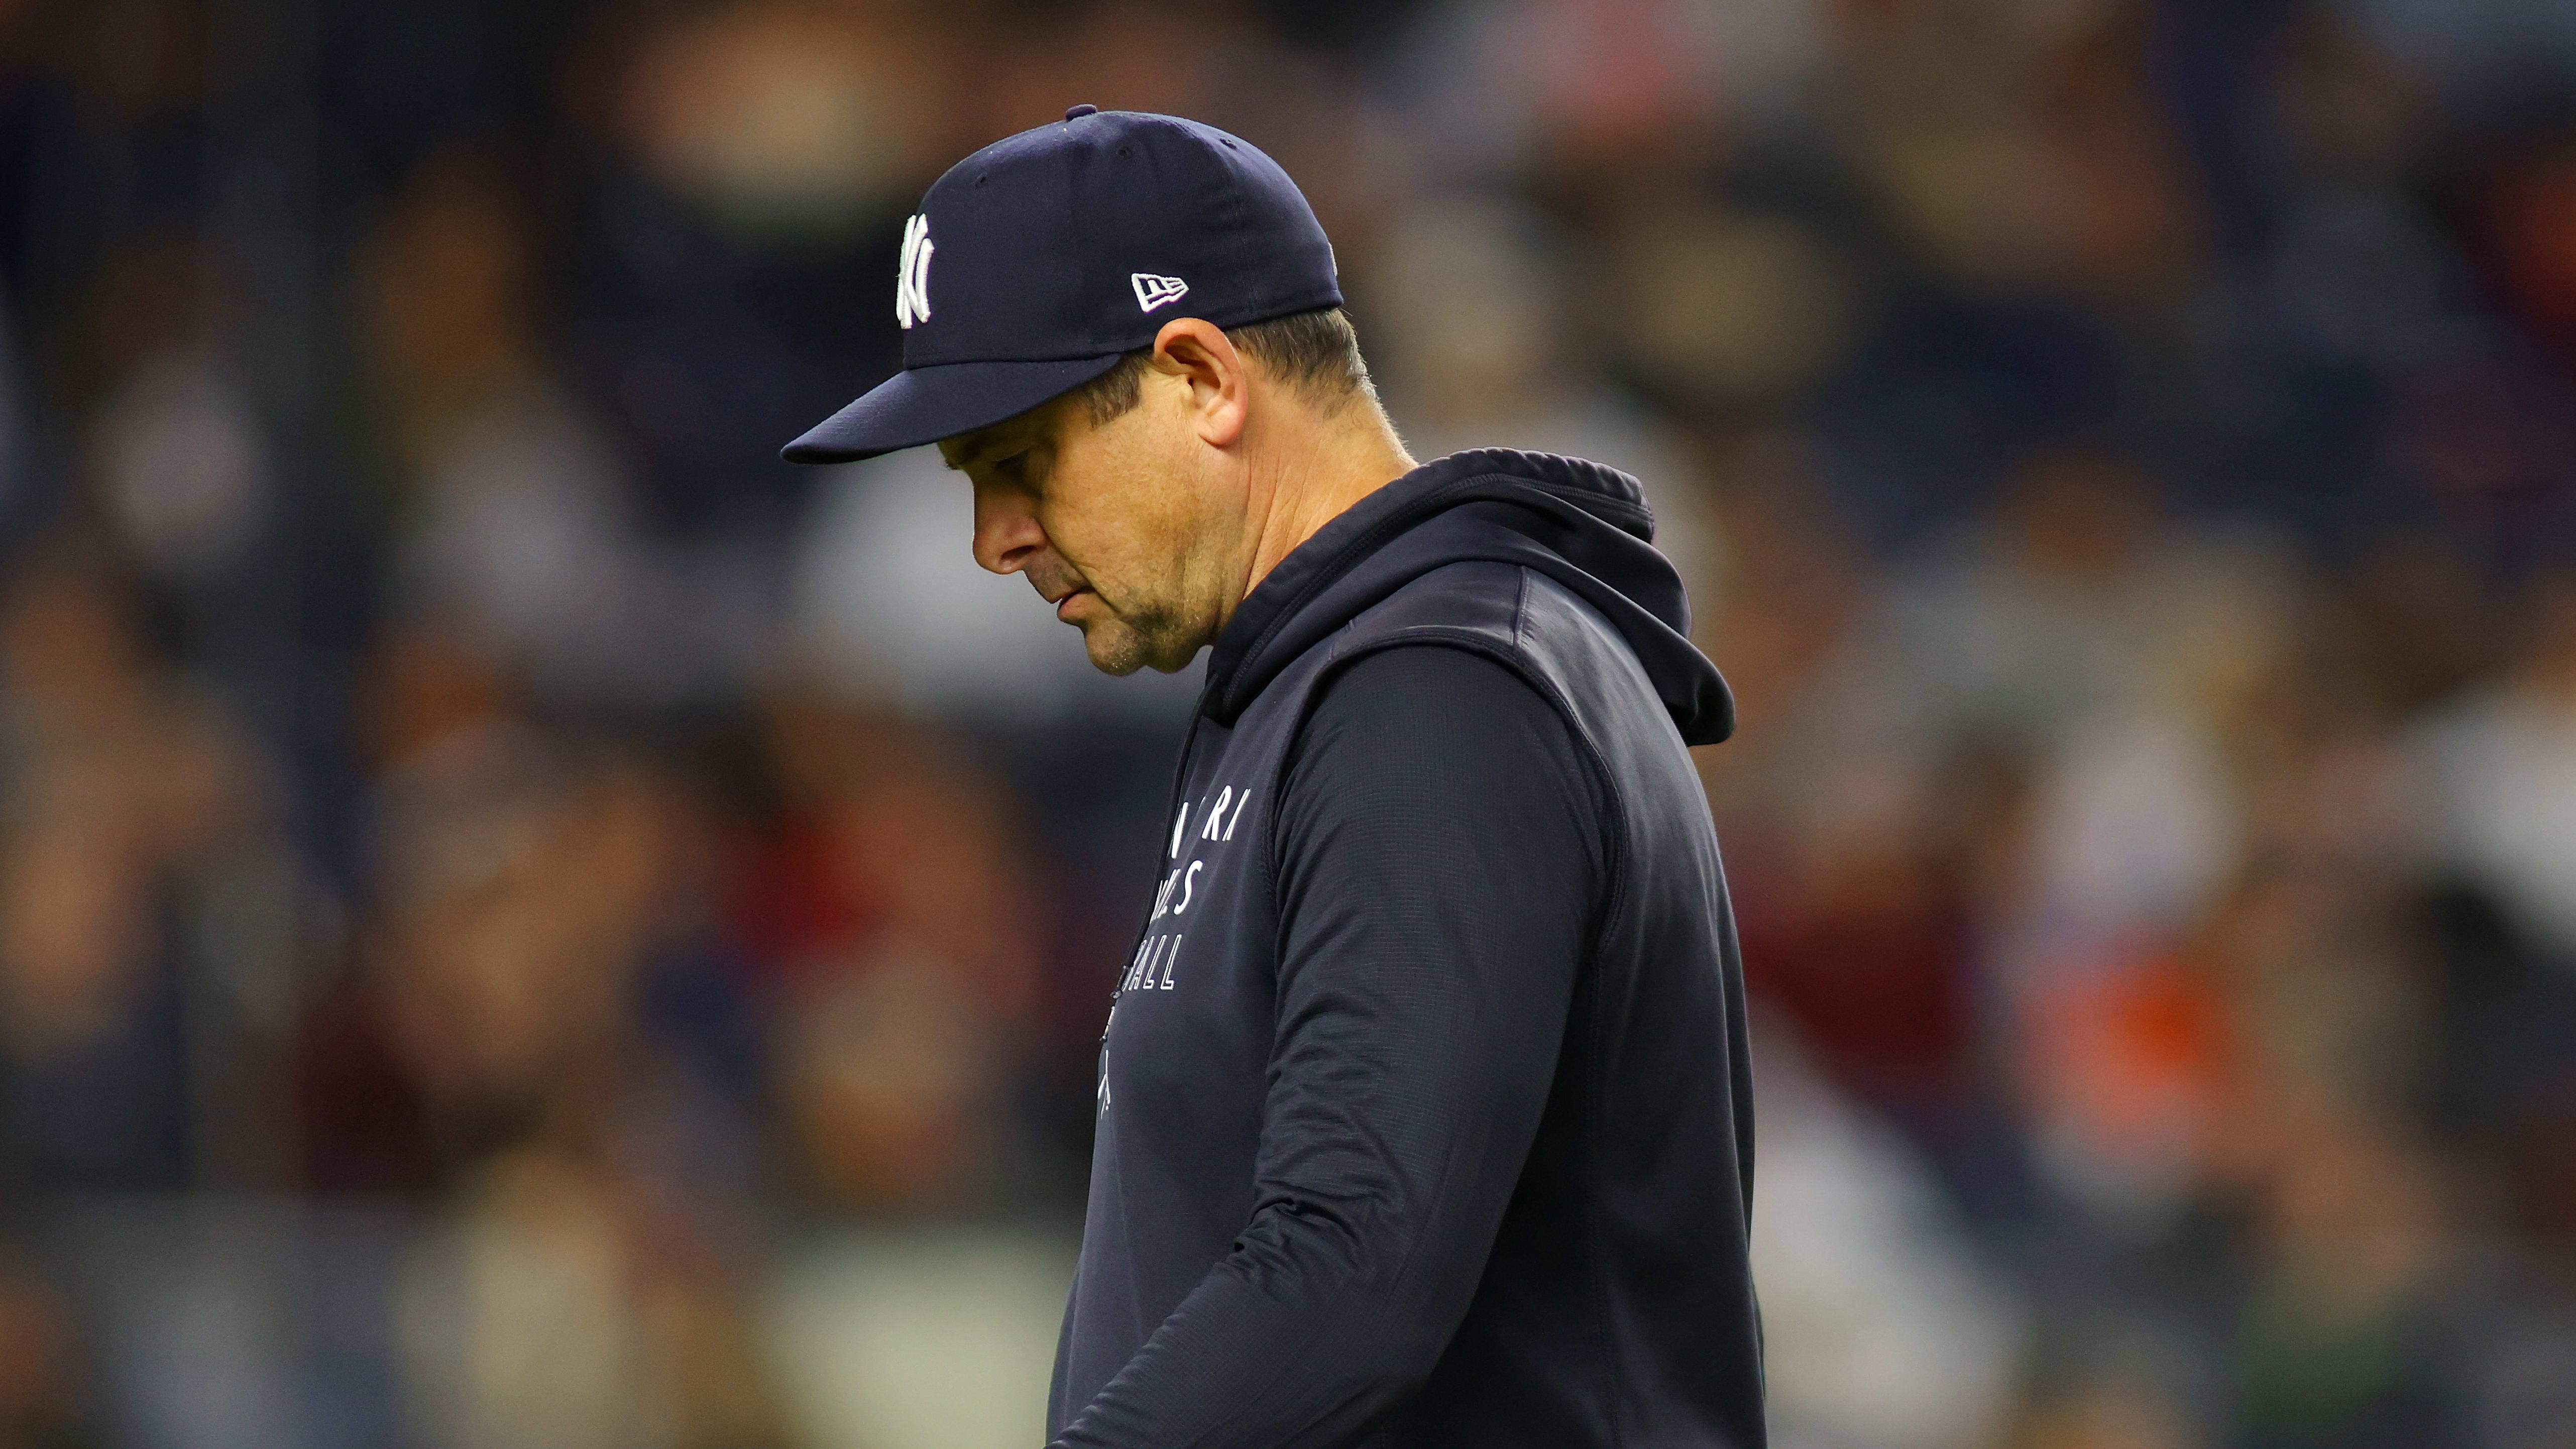 Around the bases with new Yankees manager Aaron Boone